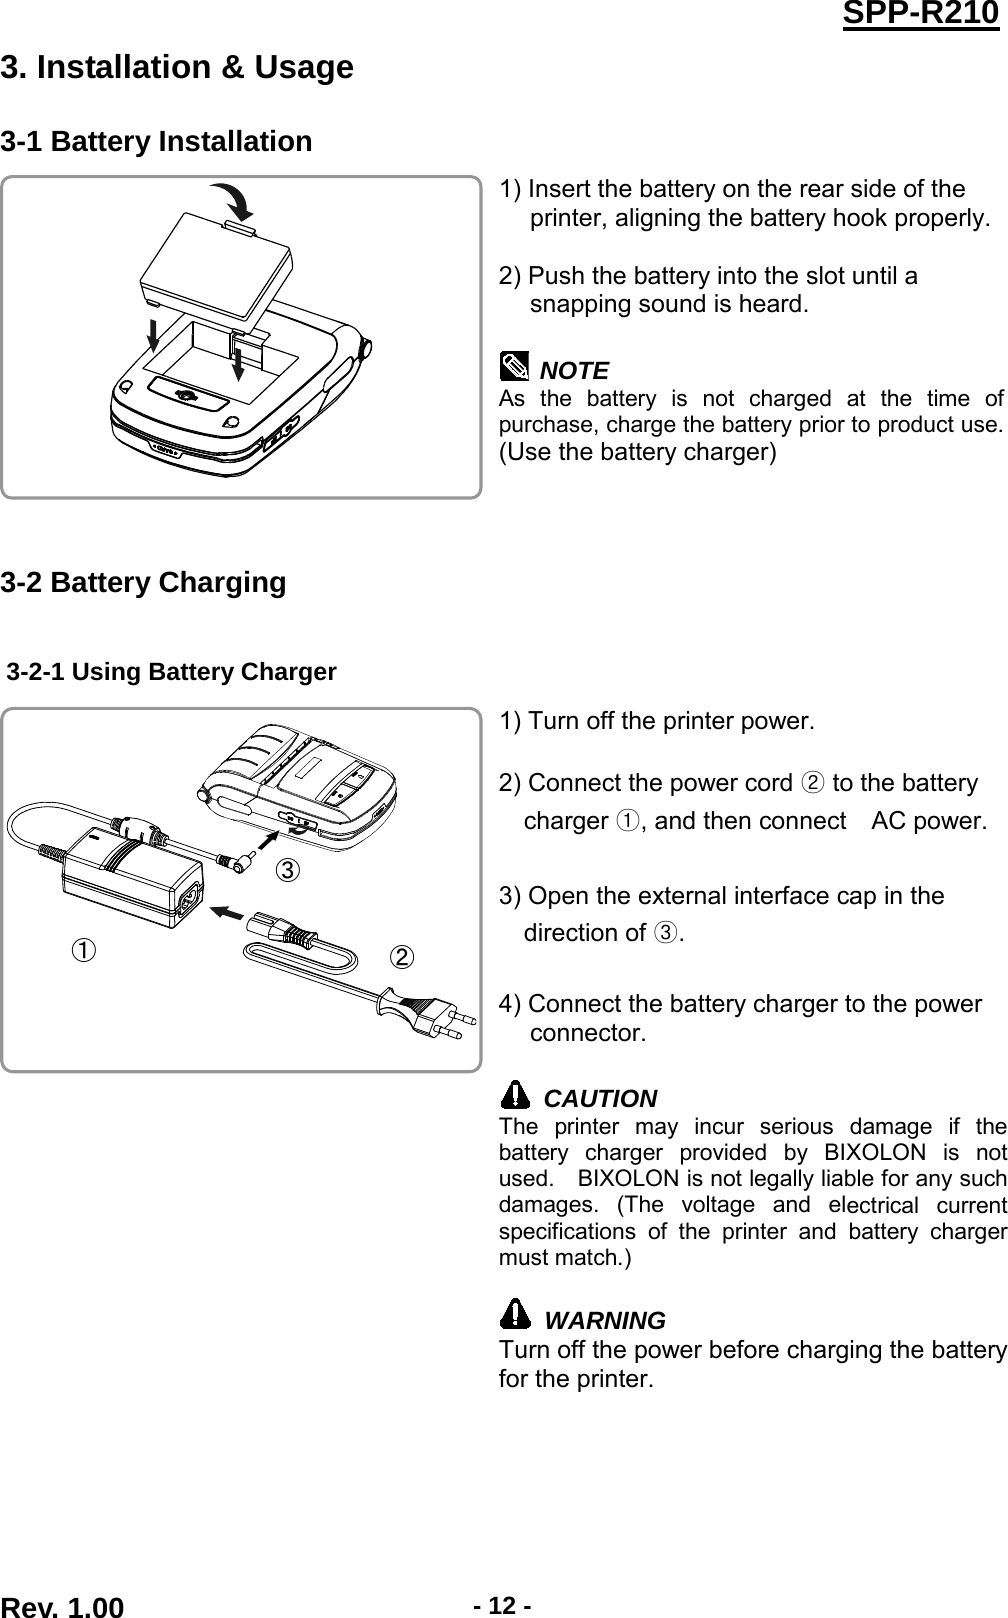  SPP-R210 3. Installation &amp; Usage 3-1 Battery Installation  1) Insert the battery on the rear side of the   printer, aligning the battery hook properly.  2) Push the battery into the slot until a   snapping sound is heard.   NOTE As the battery is not charged at the time of purchase, charge the battery prior to product use. (Use the battery charger)   3-2 Battery Charging  3-2-1 Using Battery Charger   1) Turn off the printer power.  2) Connect the power cord ② to the battery   charger ①, and then connect   AC power.  3) Open the external interface cap in the   direction of ③.  4) Connect the battery charger to the power connector.   CAUTION The printer may incur serious damage if the battery charger provided by BIXOLON is not used.    BIXOLON is not legally liable for any such damages. (The voltage and electrical current specifications of the printer and battery charger must match.)   WARNING Turn off the power before charging the battery for the printer.    ① ② ③ Rev. 1.00  - 12 - 